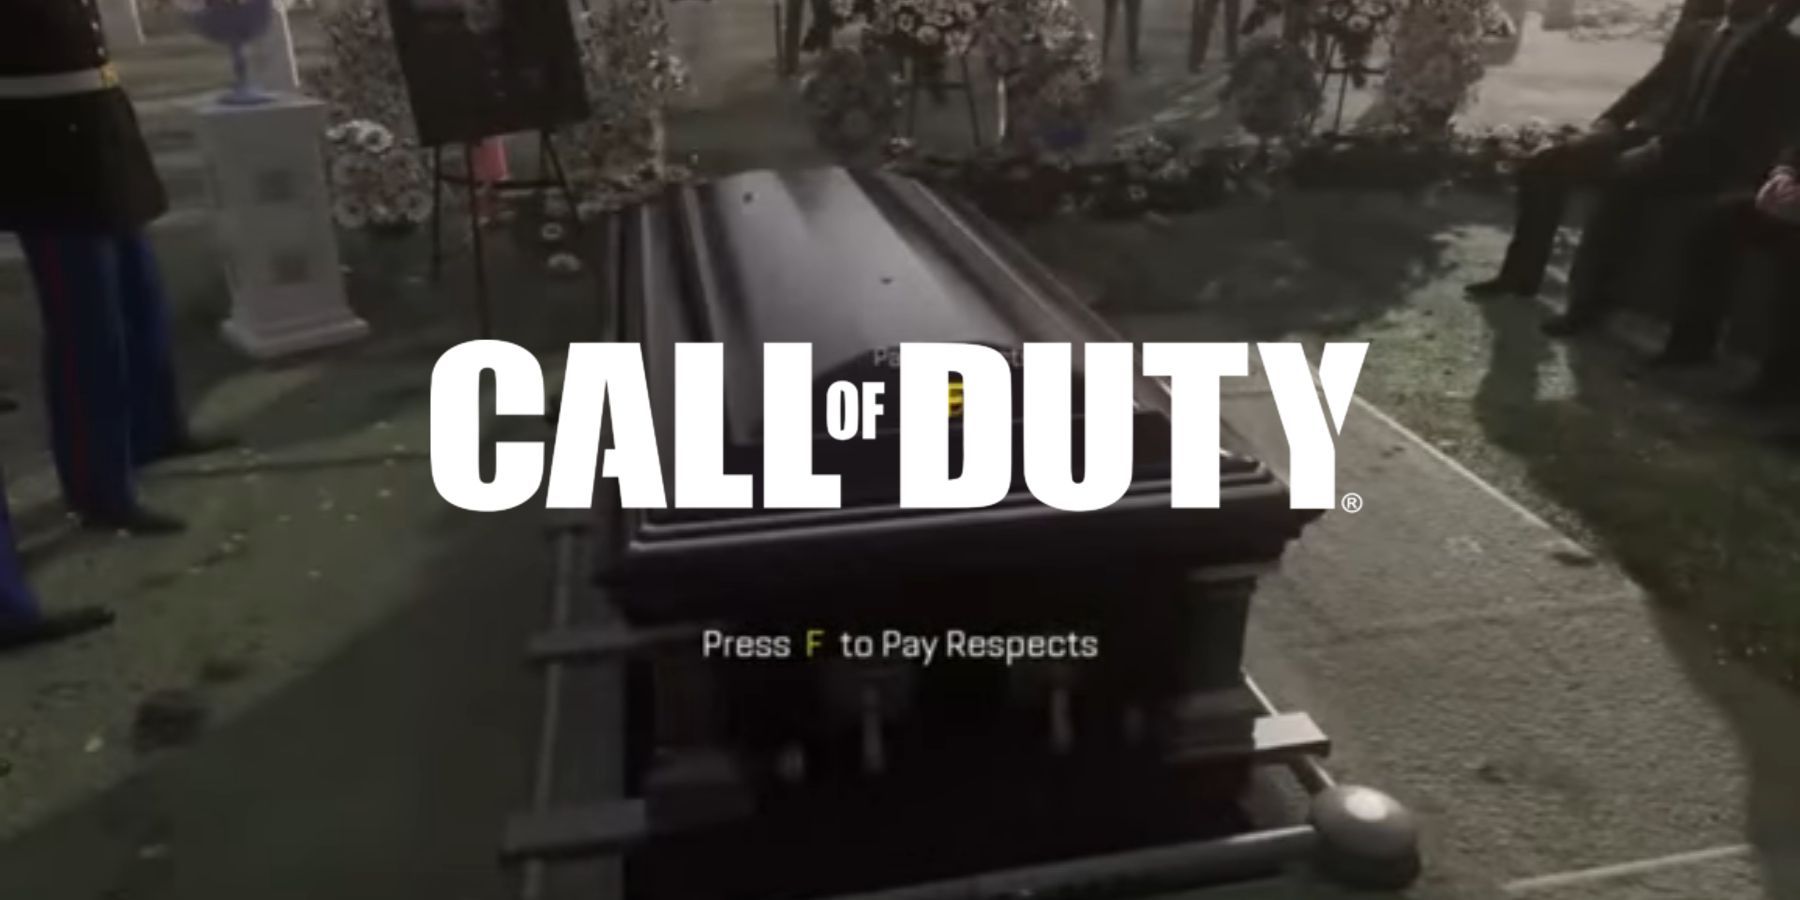 Activision Planning 'Full Annual Premium Release' for Call
of Duty Series in 2023